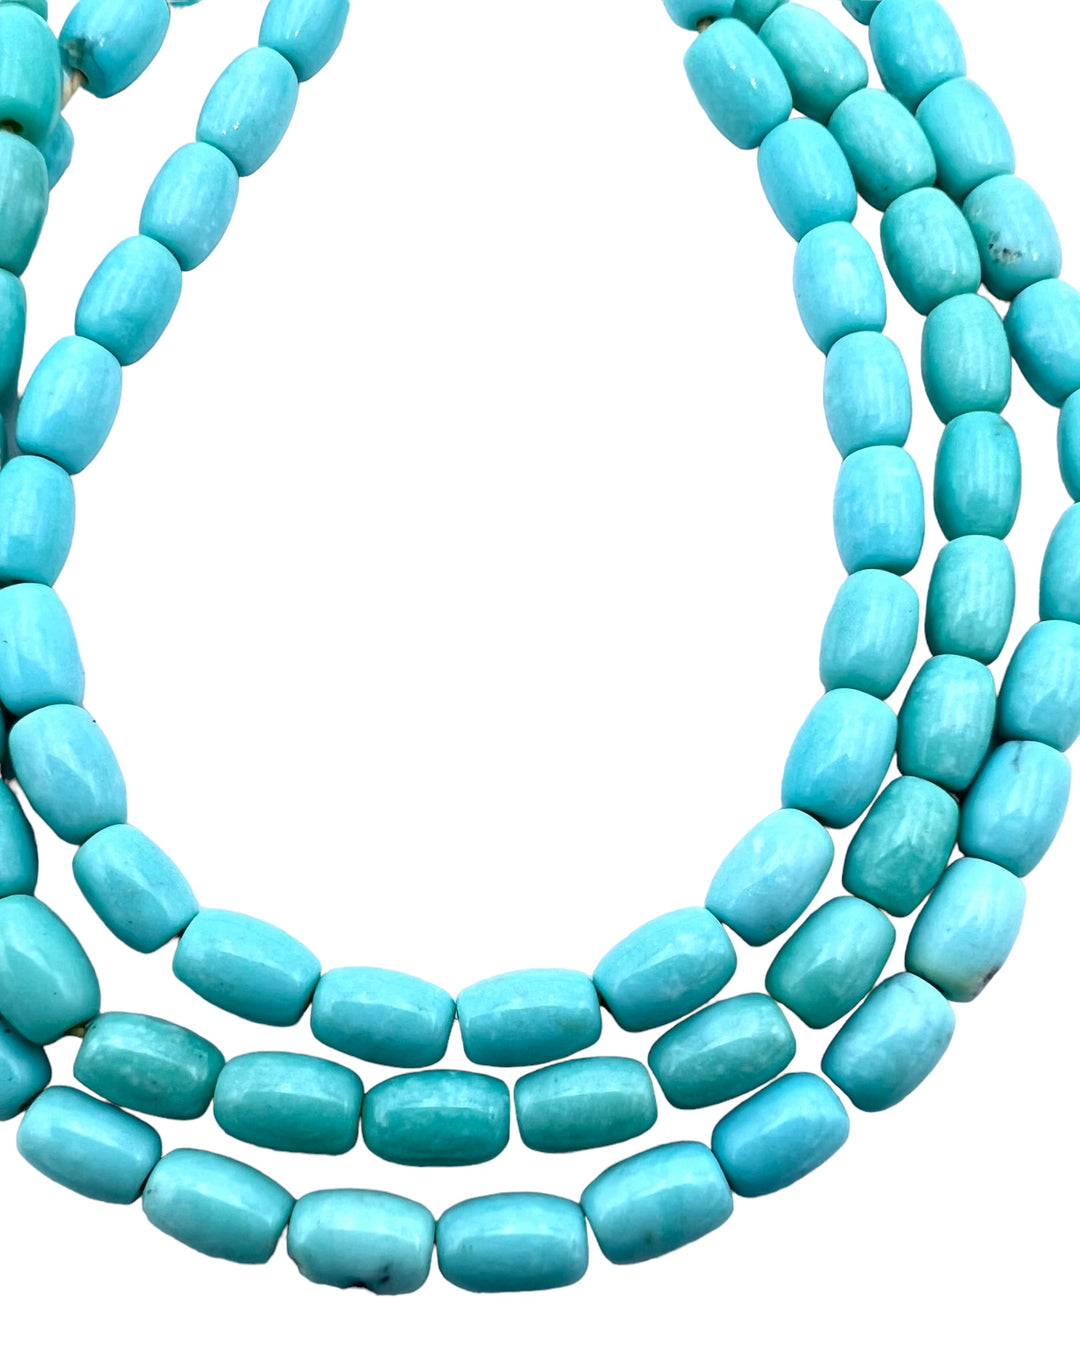 Natural Campitos (Mex) Turquoise 4x6mm Barrel Beads (9 inch Strand)